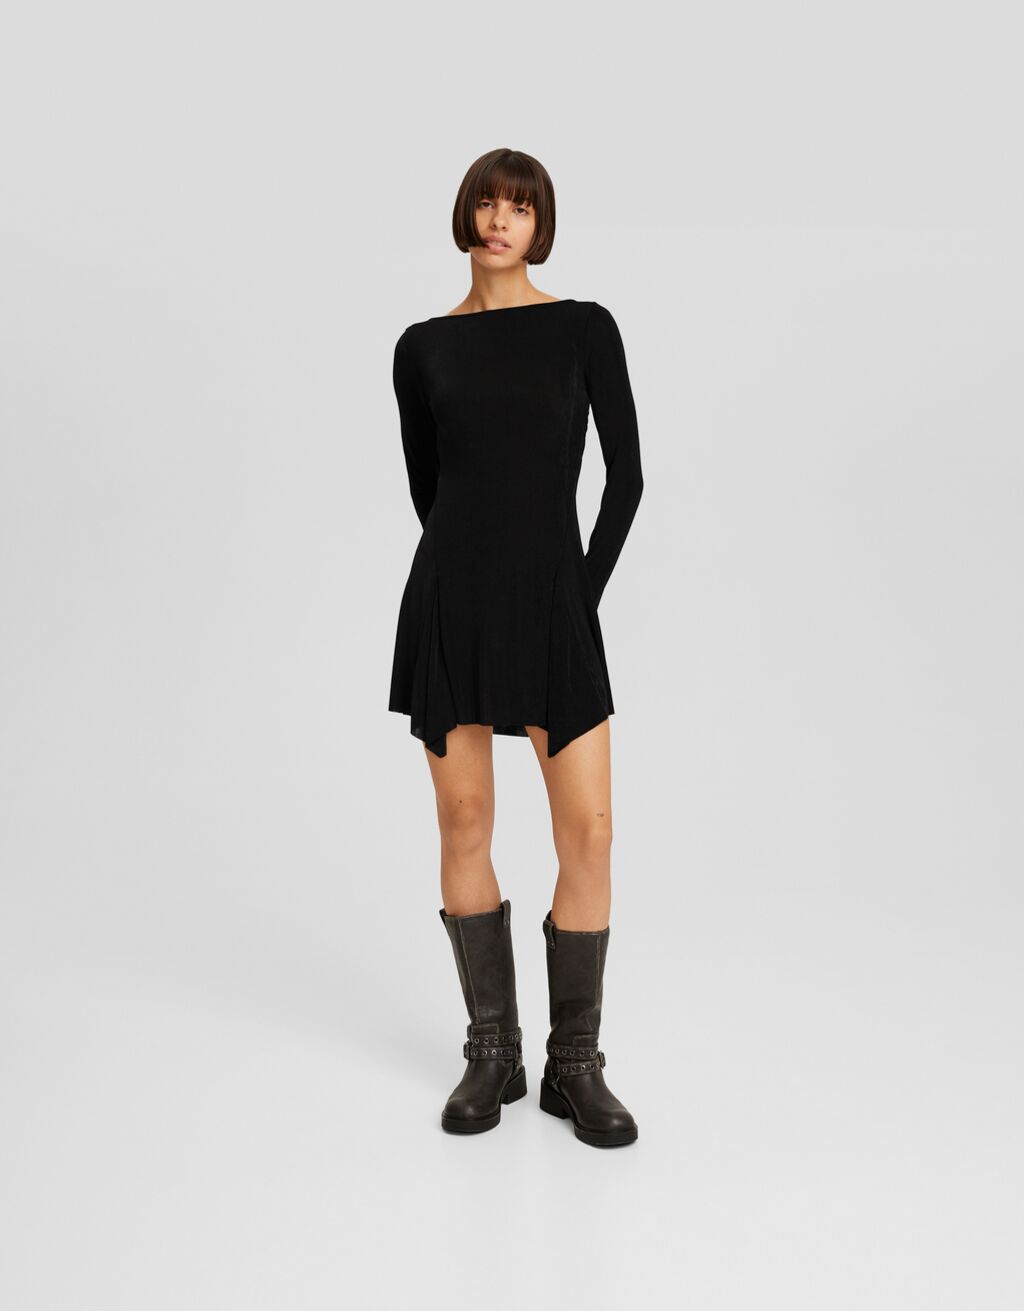 Mini dress with an open back and long sleeves